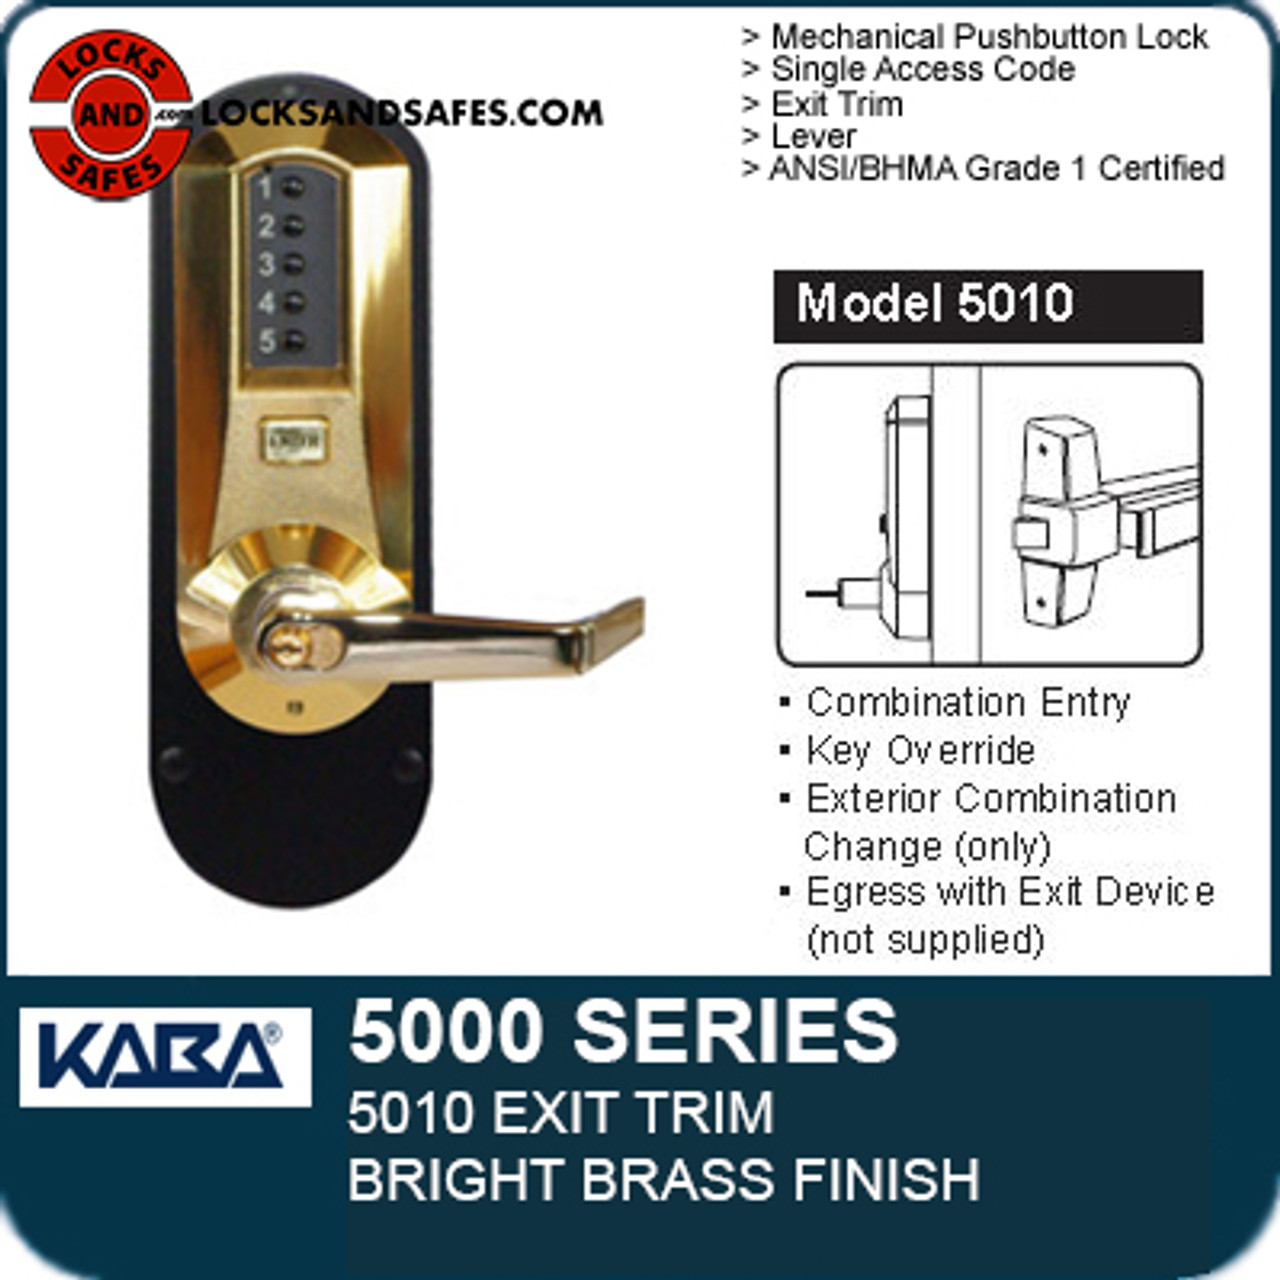 Kaba Simplex LP1000 Series Metal Mechanical Pushbutton Exit Trim Lock with Lever, Combination Entry and Key Override, I C Best and Equivalents (6 - 2